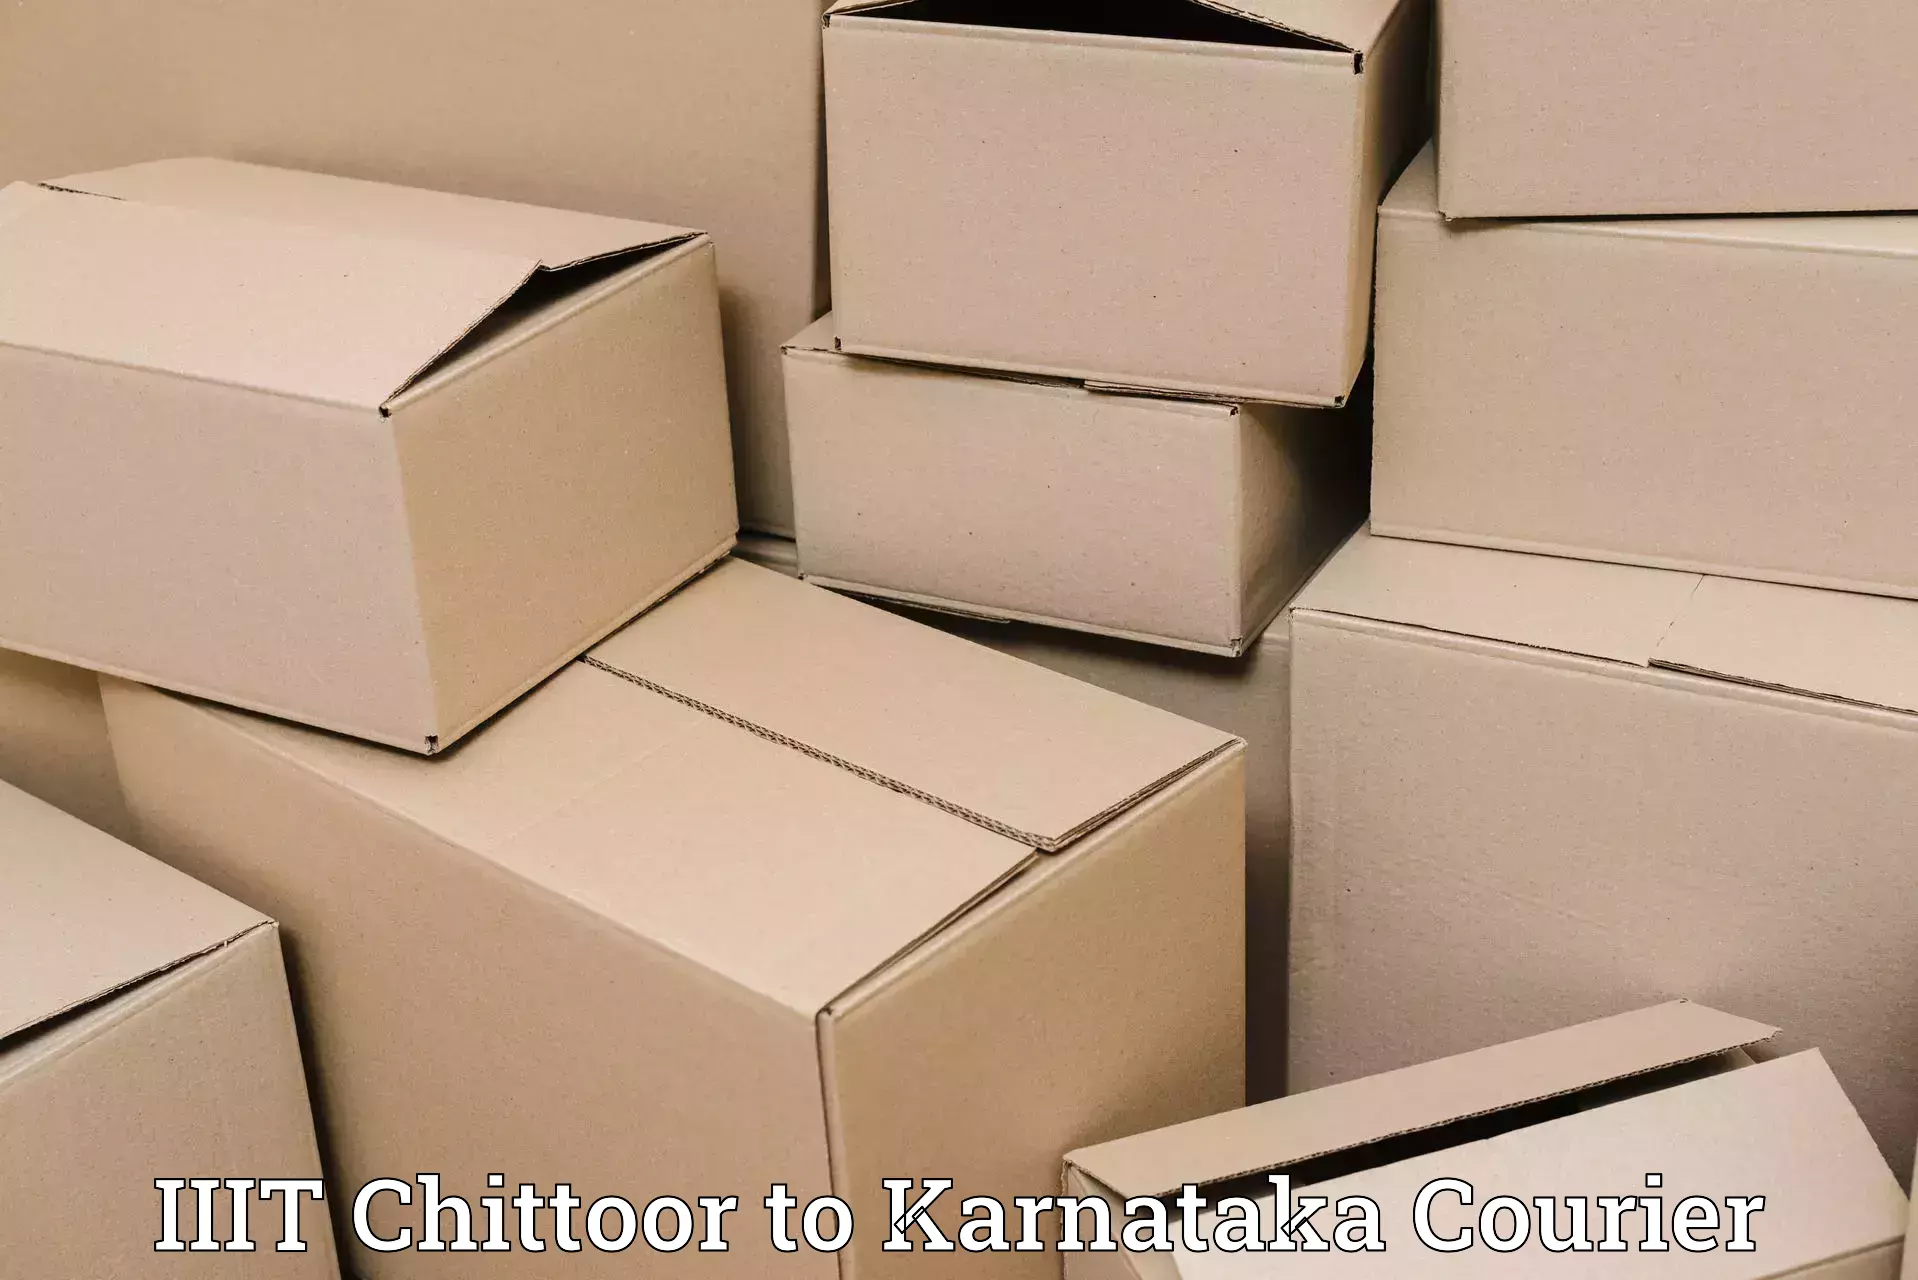 State-of-the-art courier technology IIIT Chittoor to Yaragatti